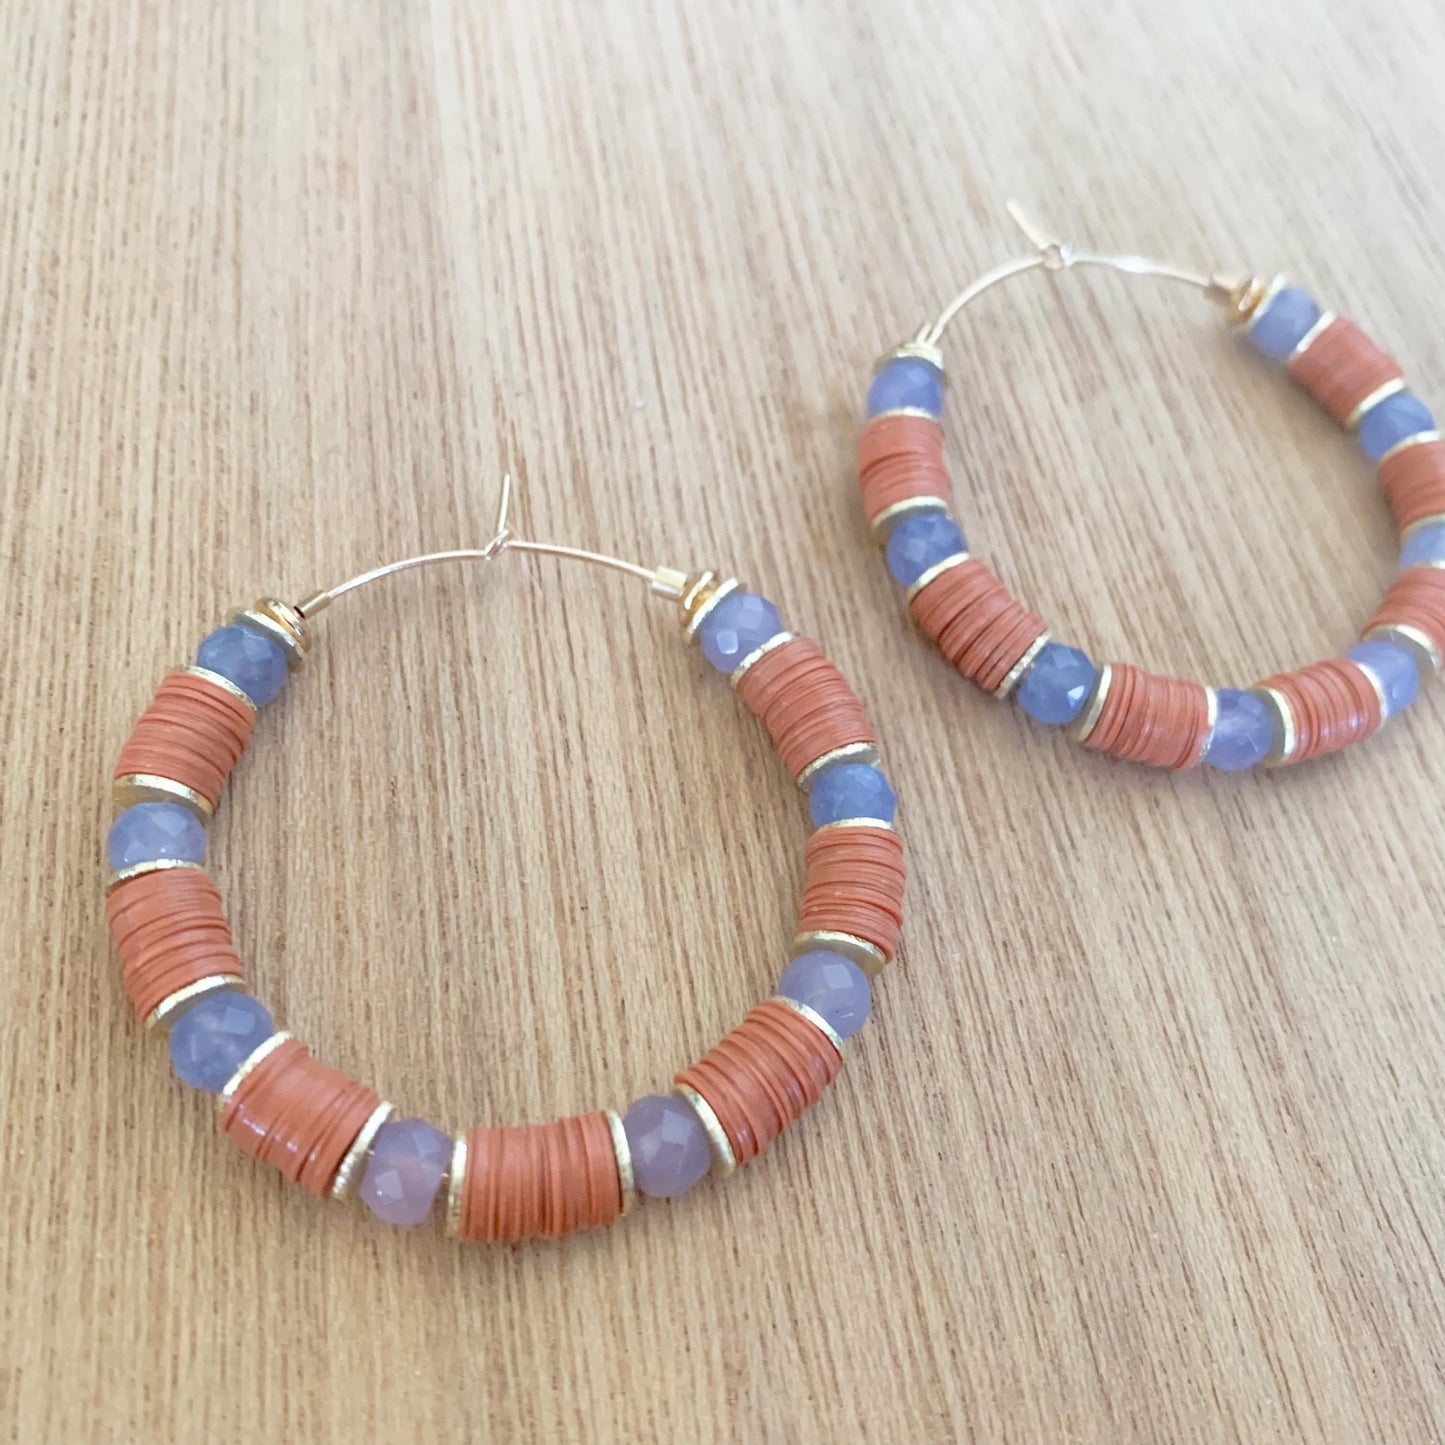 Lavender and Terra cotta hoops